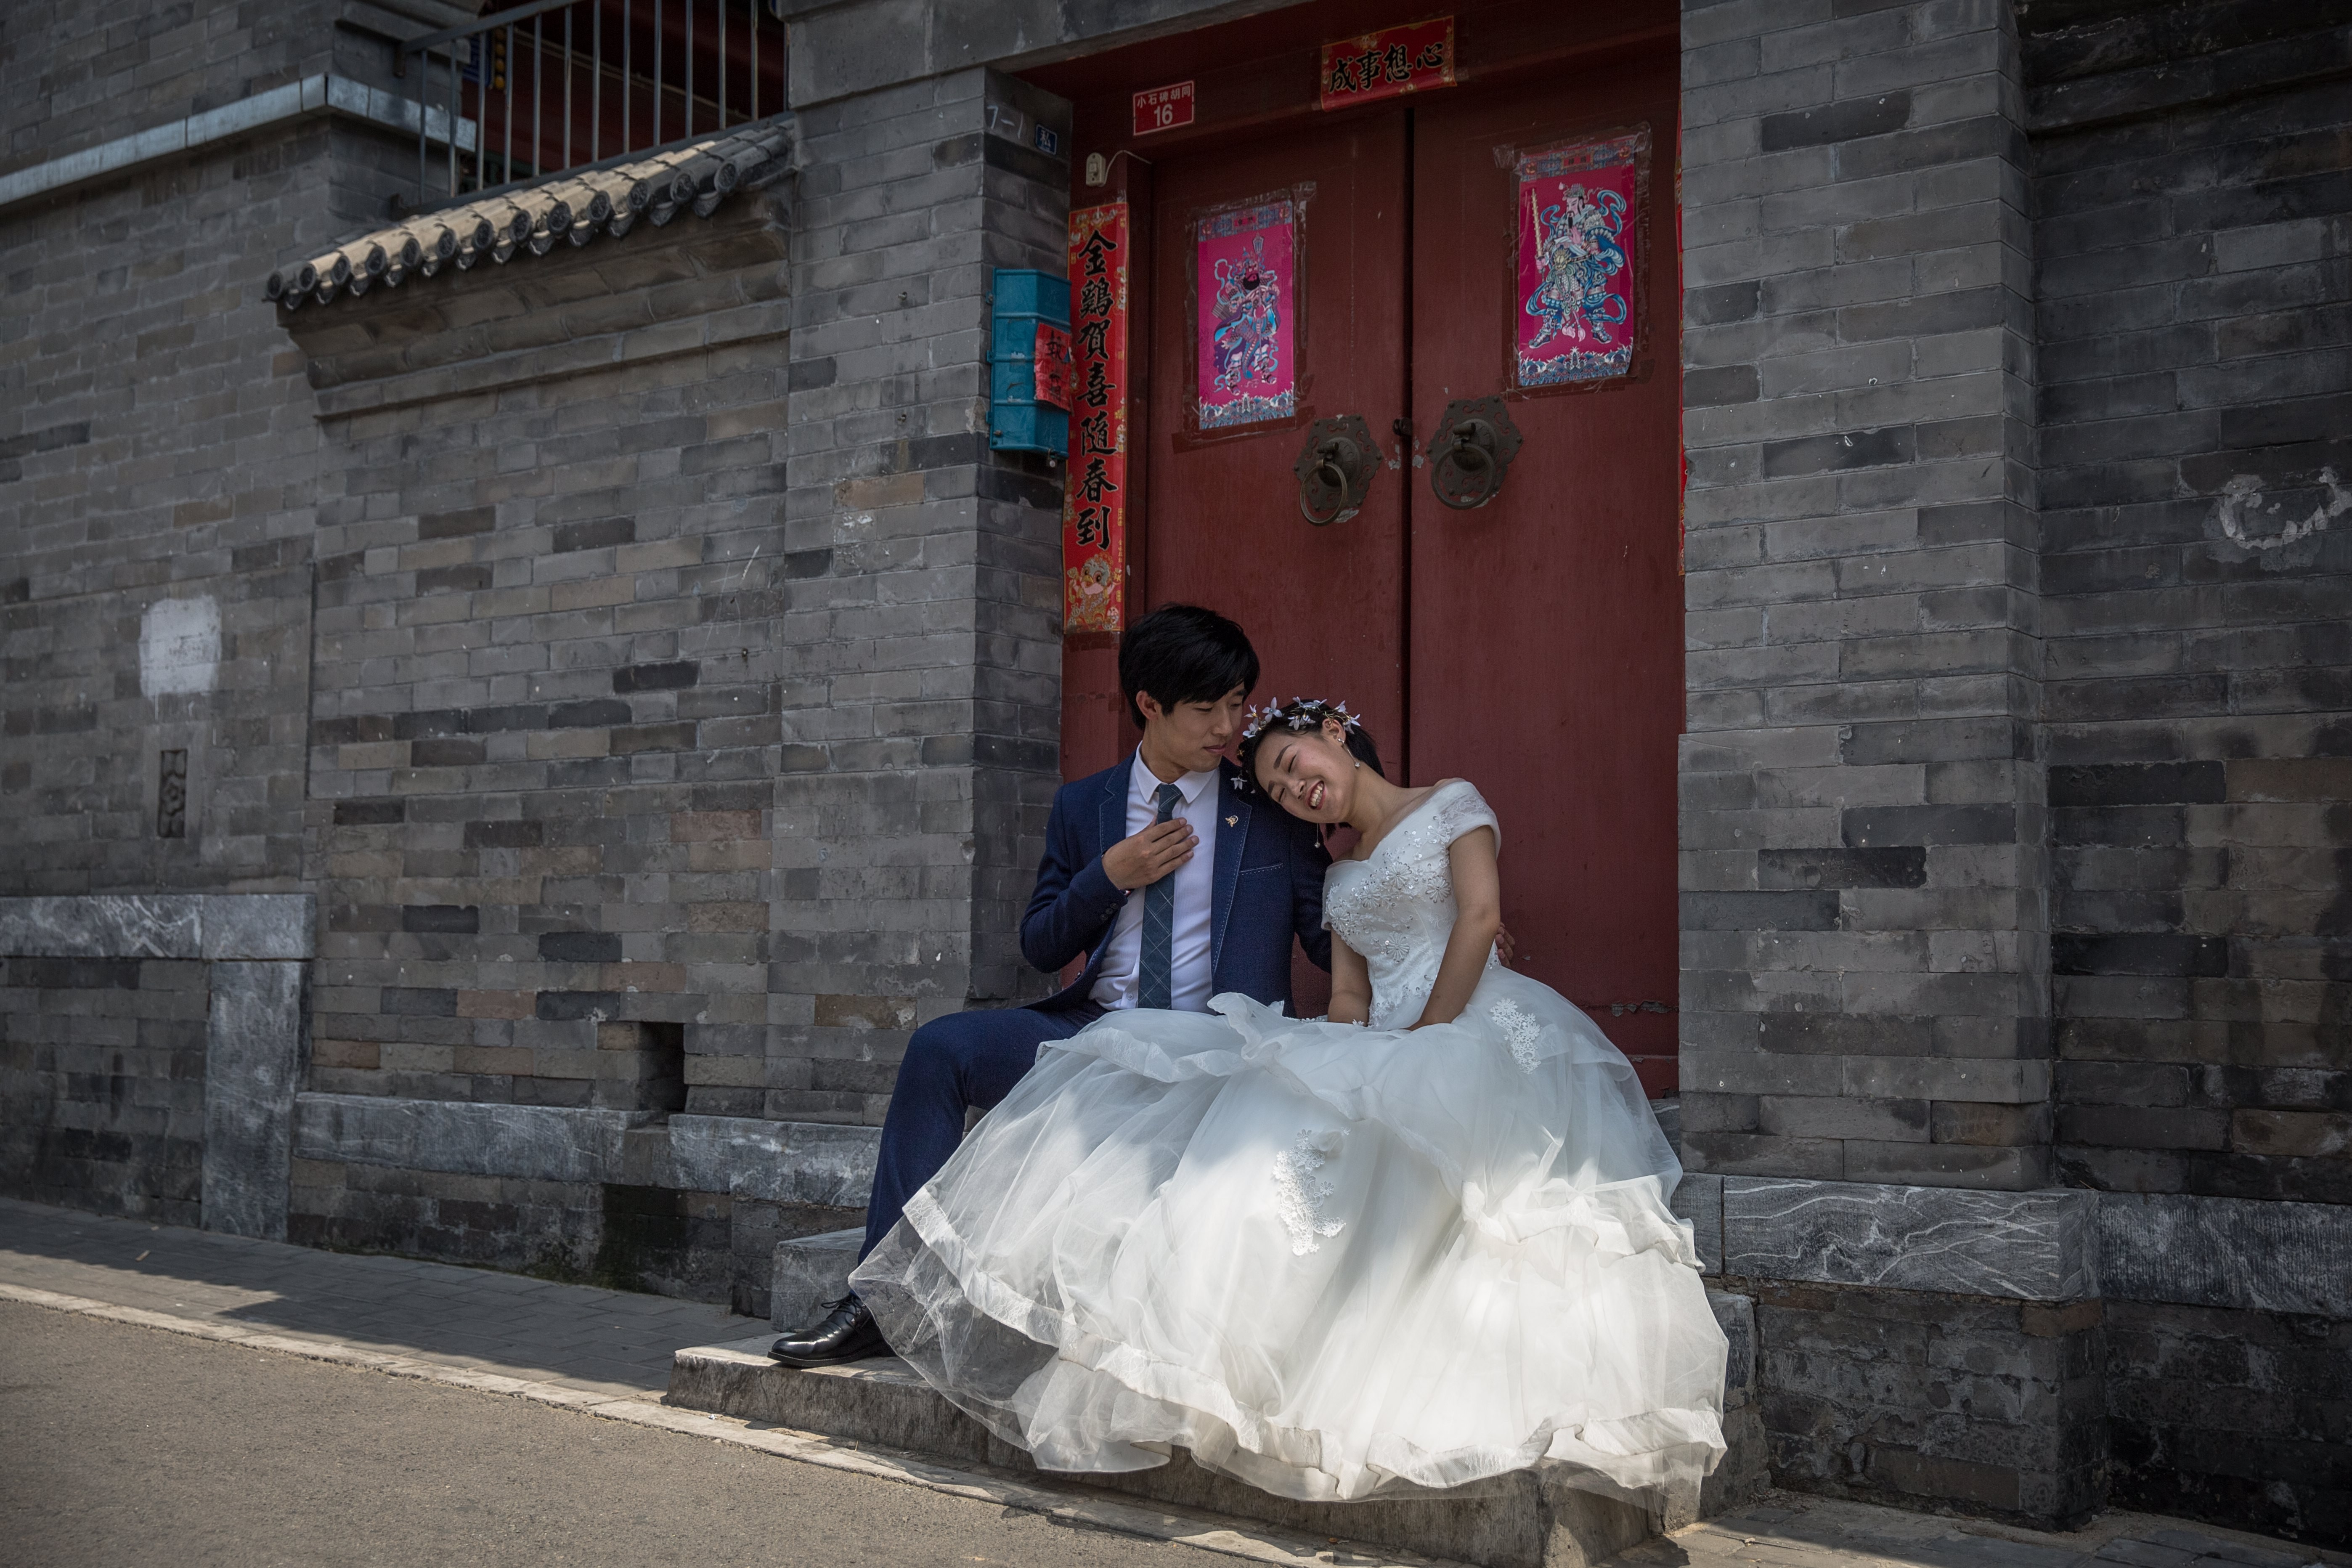 Despite bringing an end to its one-child policy, China is facing a demographic time bomb as fewer couples get married and the national birth rate continues to slide. Photo: EPA